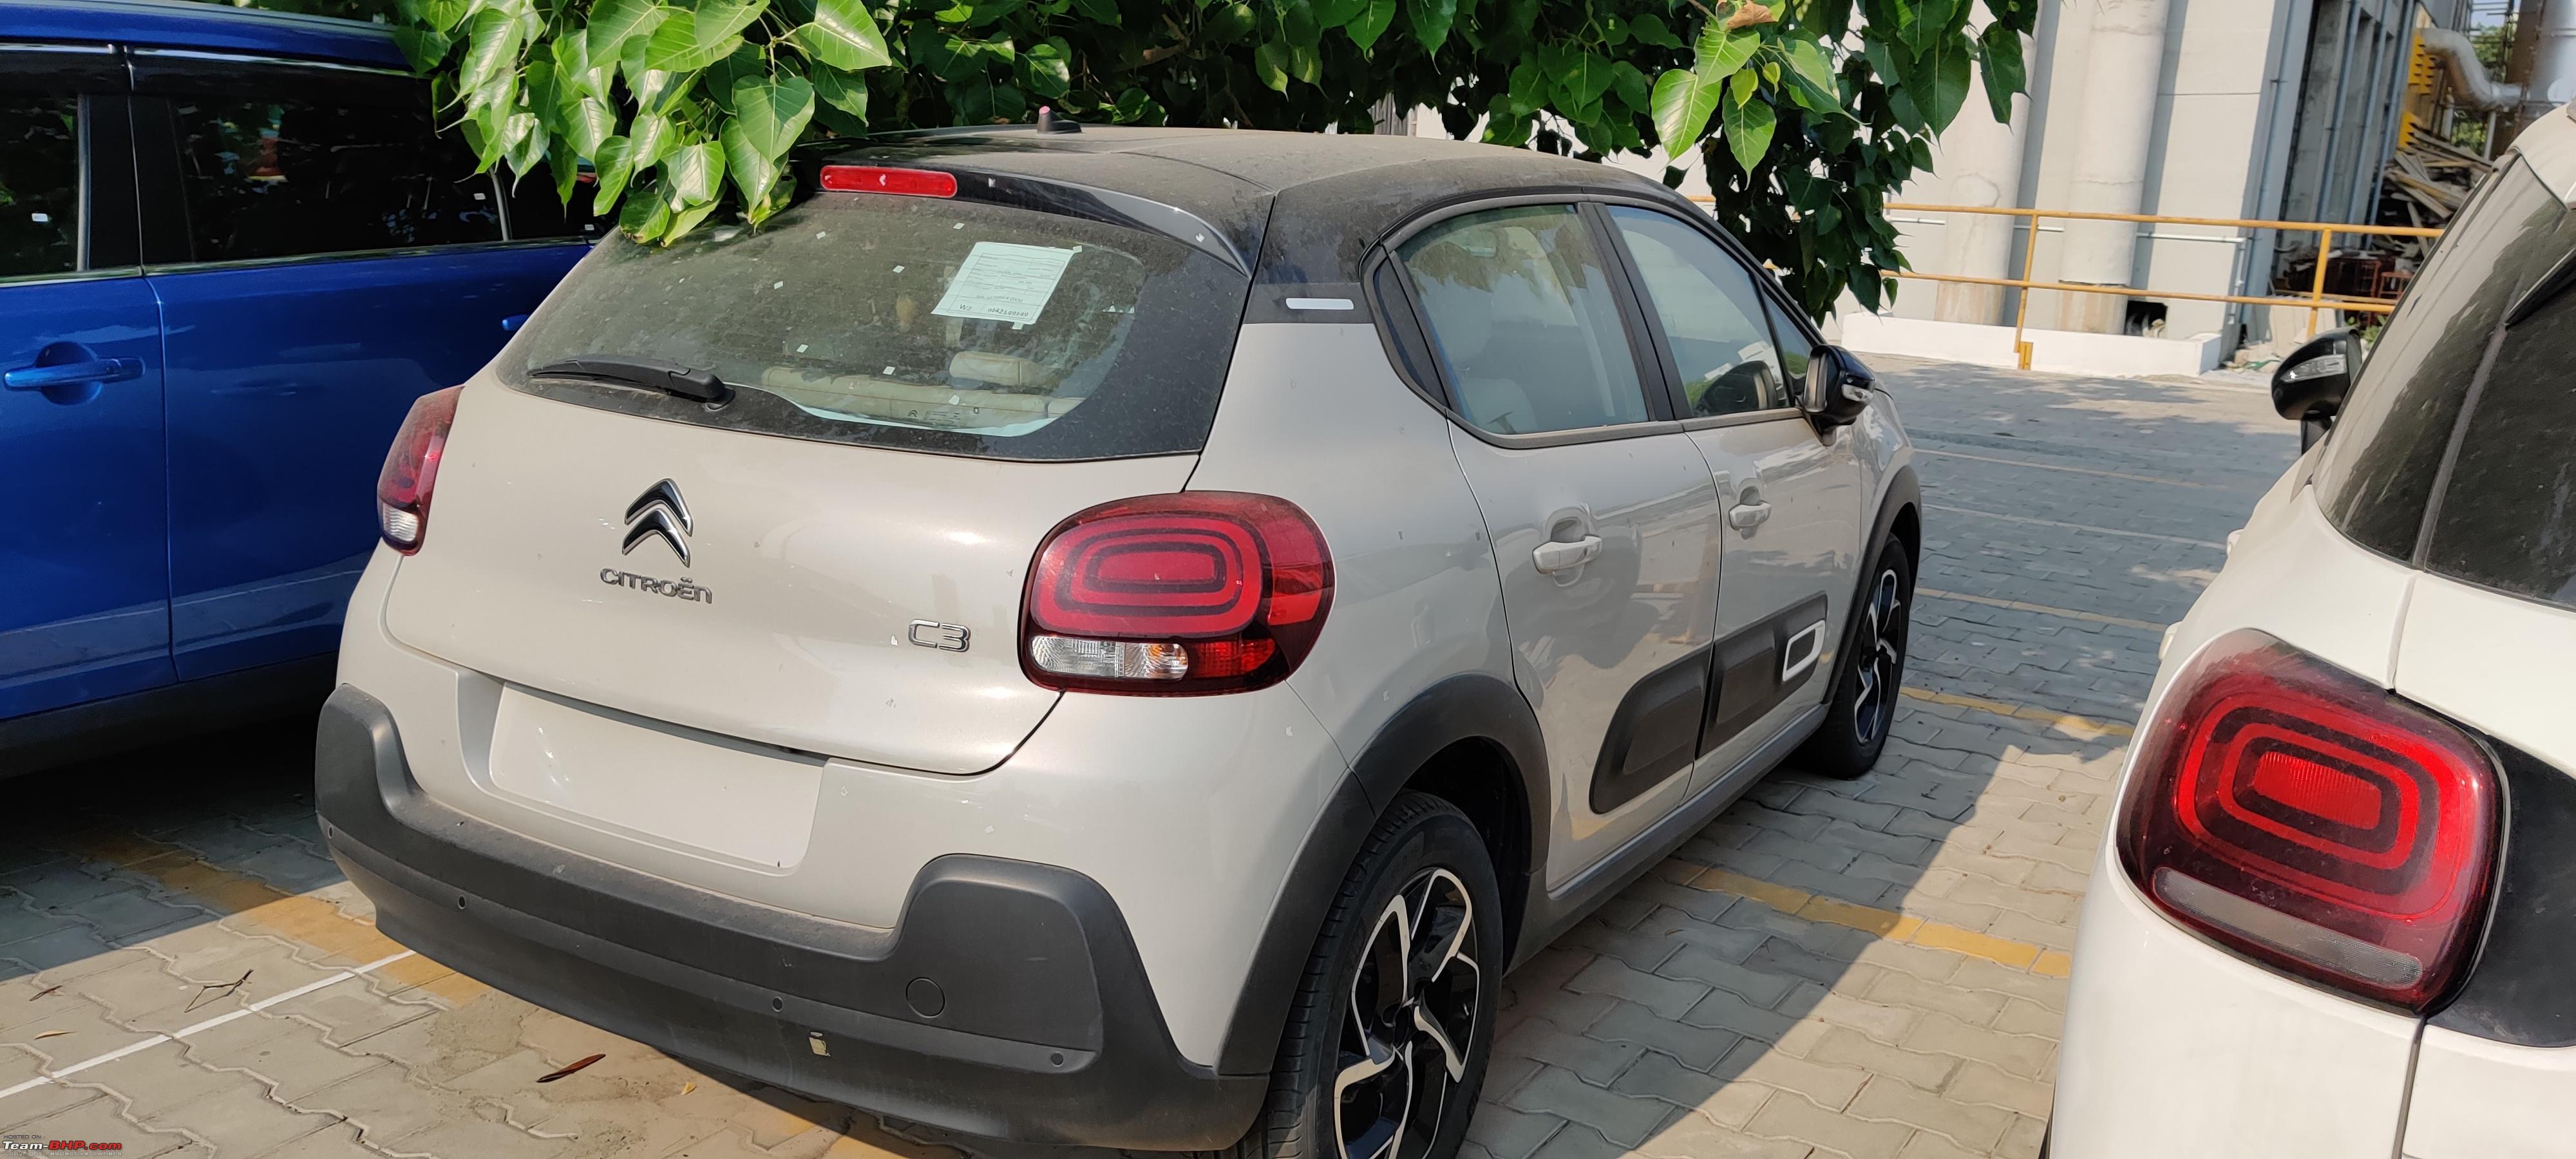 Citroën C3 car review – 'How many times do you intend to crash this car?', Motoring